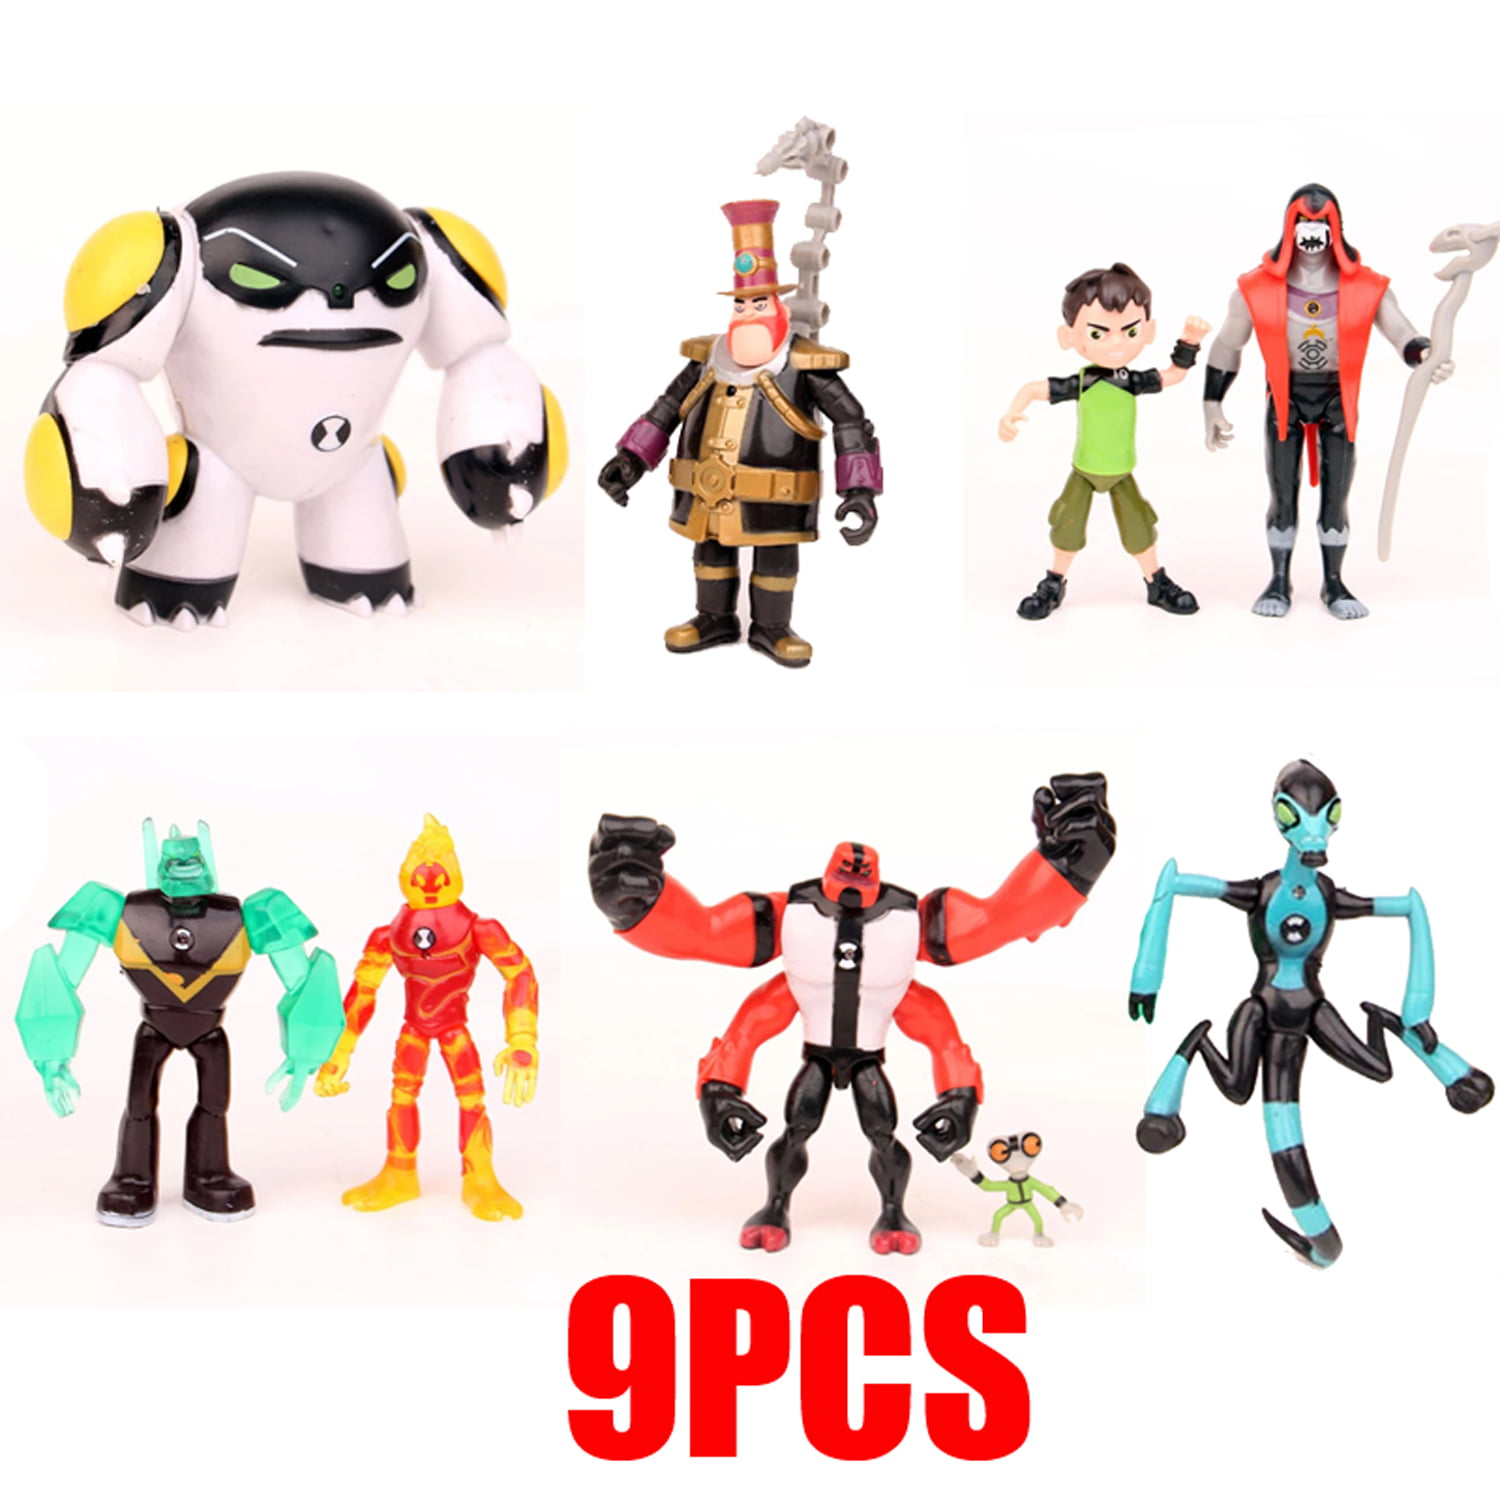 9Pcs/set High Quality Ben 10 PVC Figure Toy Action Toy Figures Gift For Children